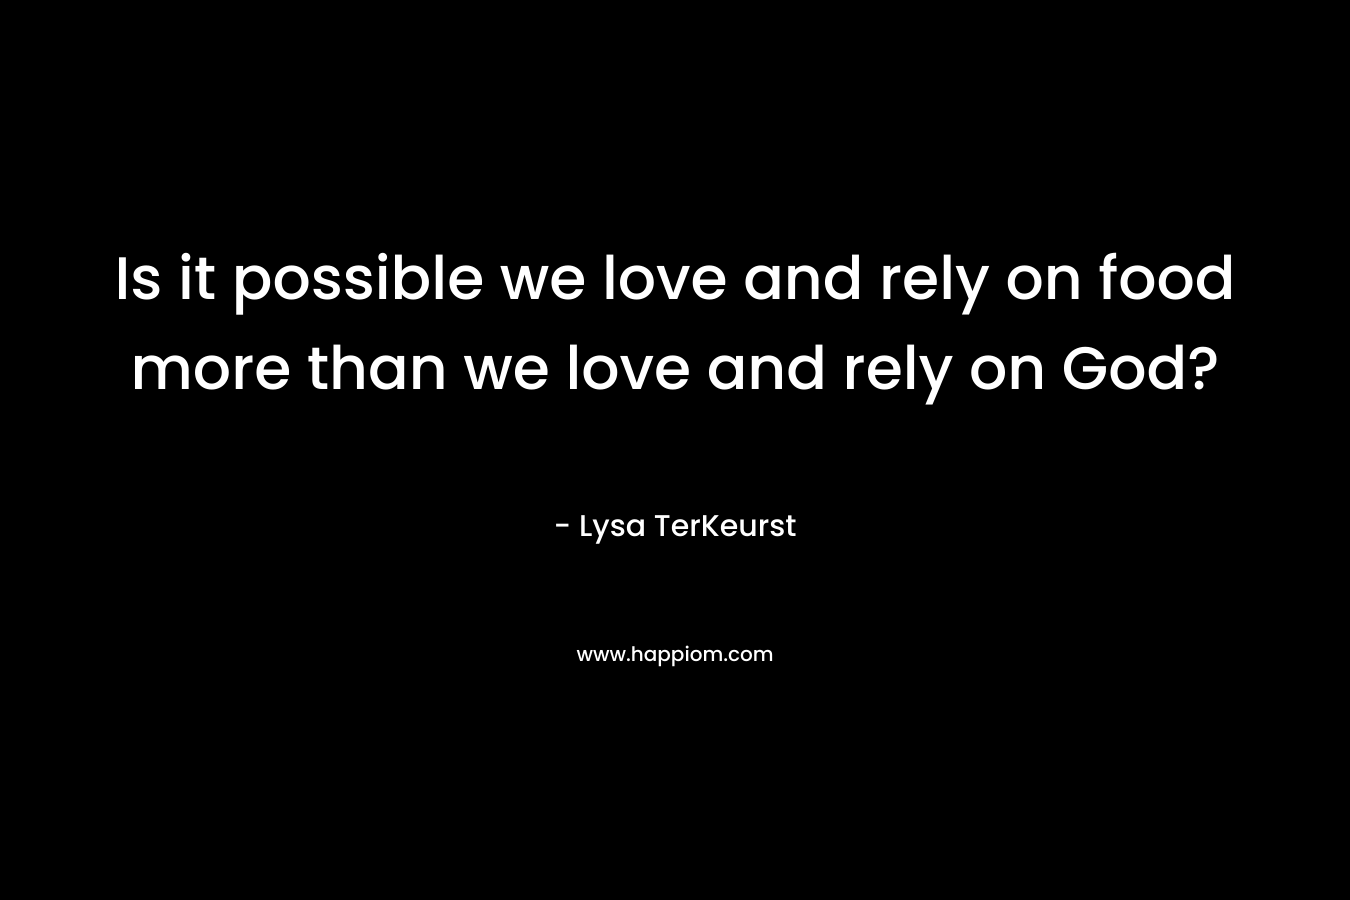 Is it possible we love and rely on food more than we love and rely on God? – Lysa TerKeurst